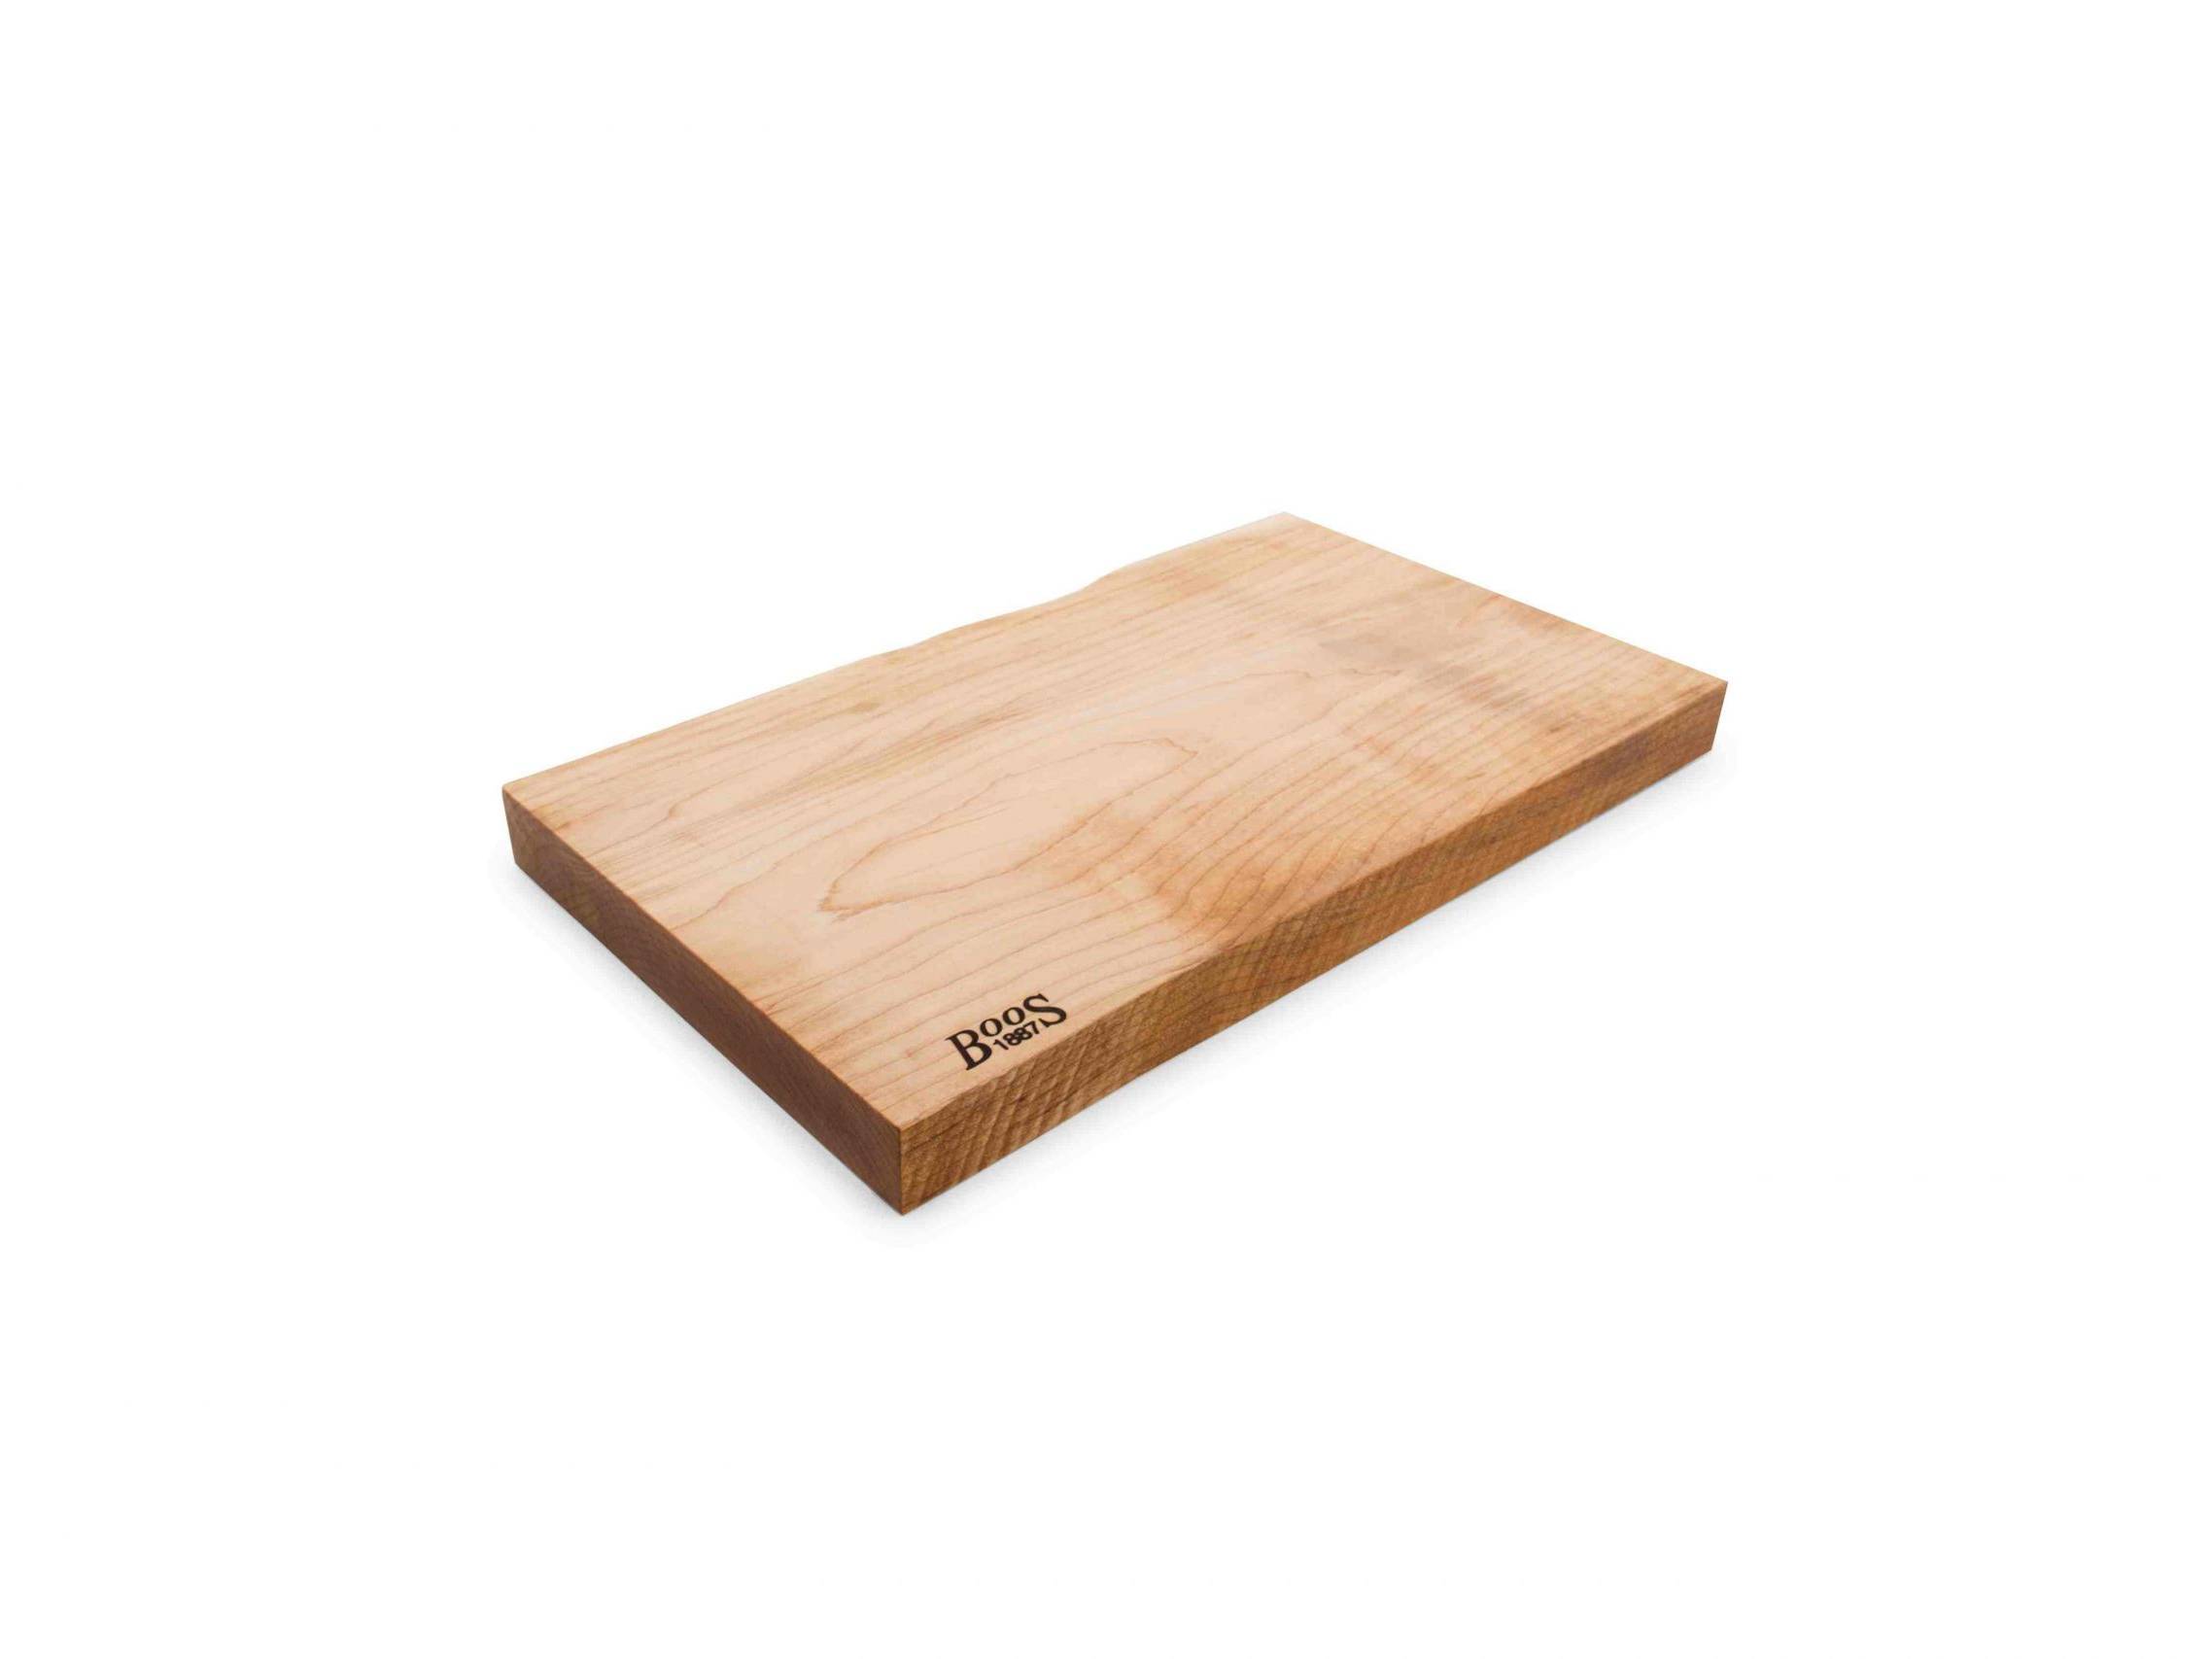 Boos 1887 / Rustic Edge one piece cutting board; hard maple; can be used on both sides 29